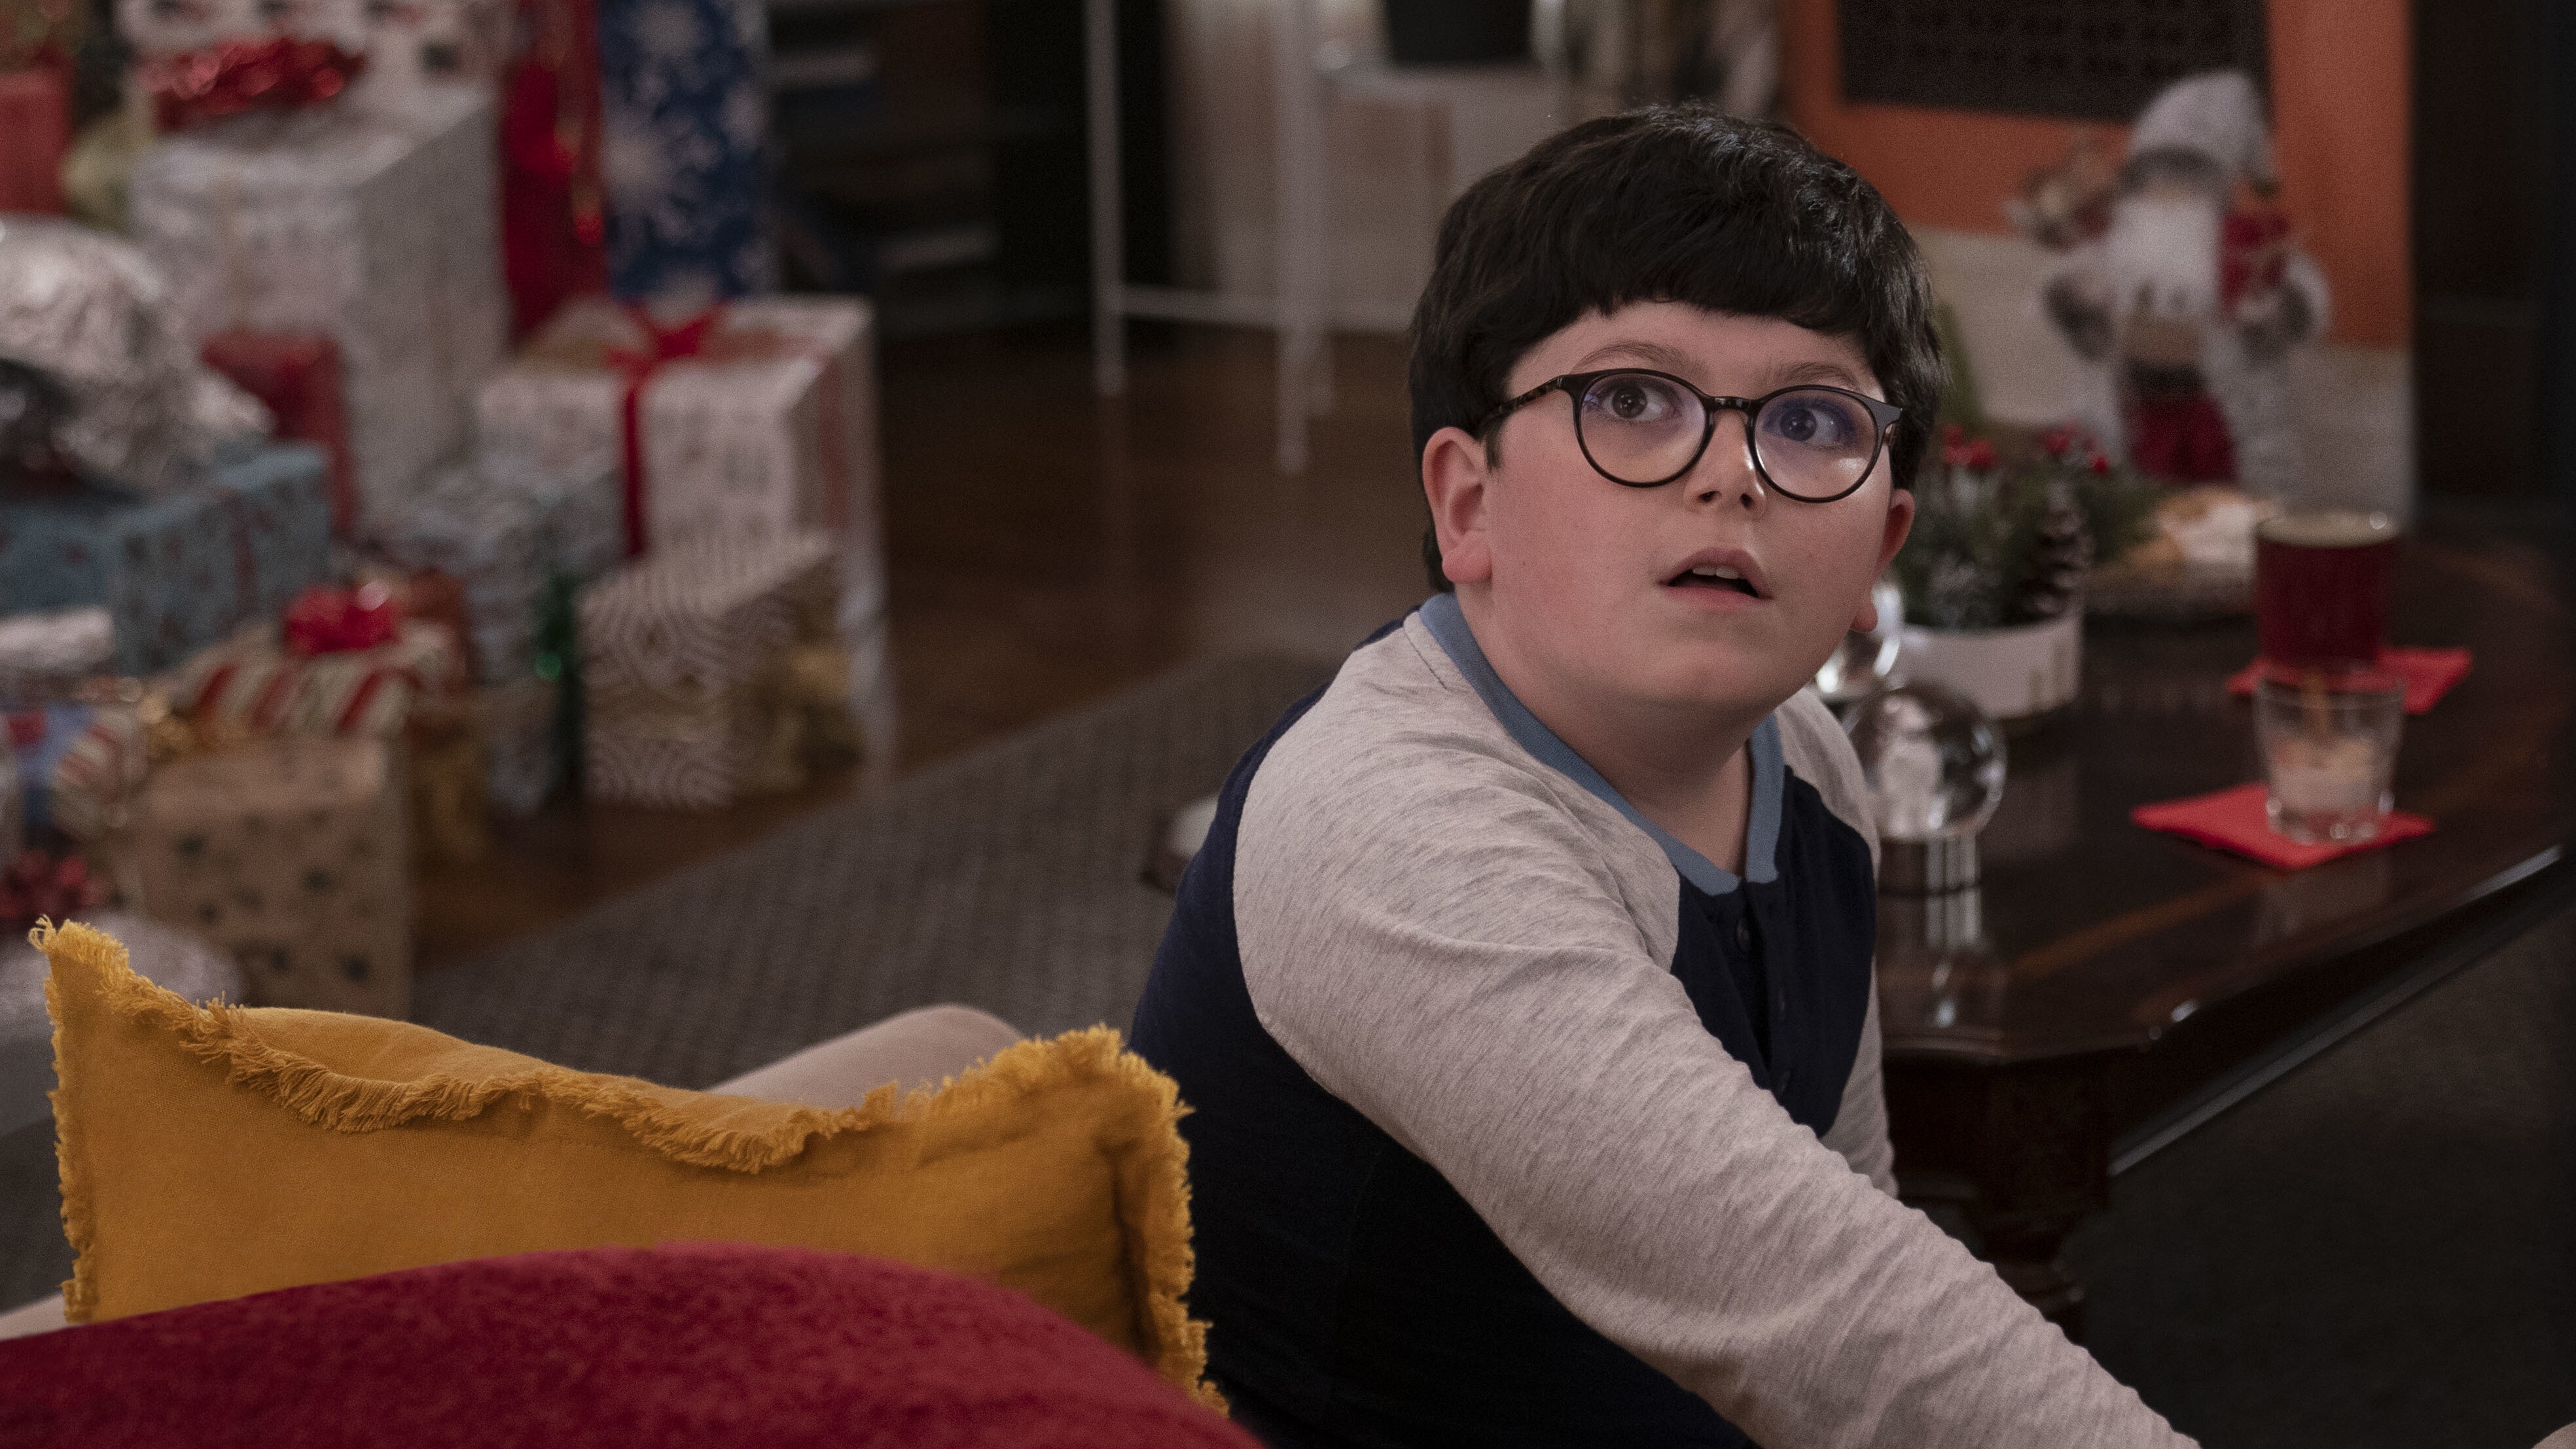 Archie Yates as Max in HOME SWEET HOME ALONE, exclusively on Disney+. Photo by Philippe Bosse. ©2021 20th Century Studios. All Rights Reserved.